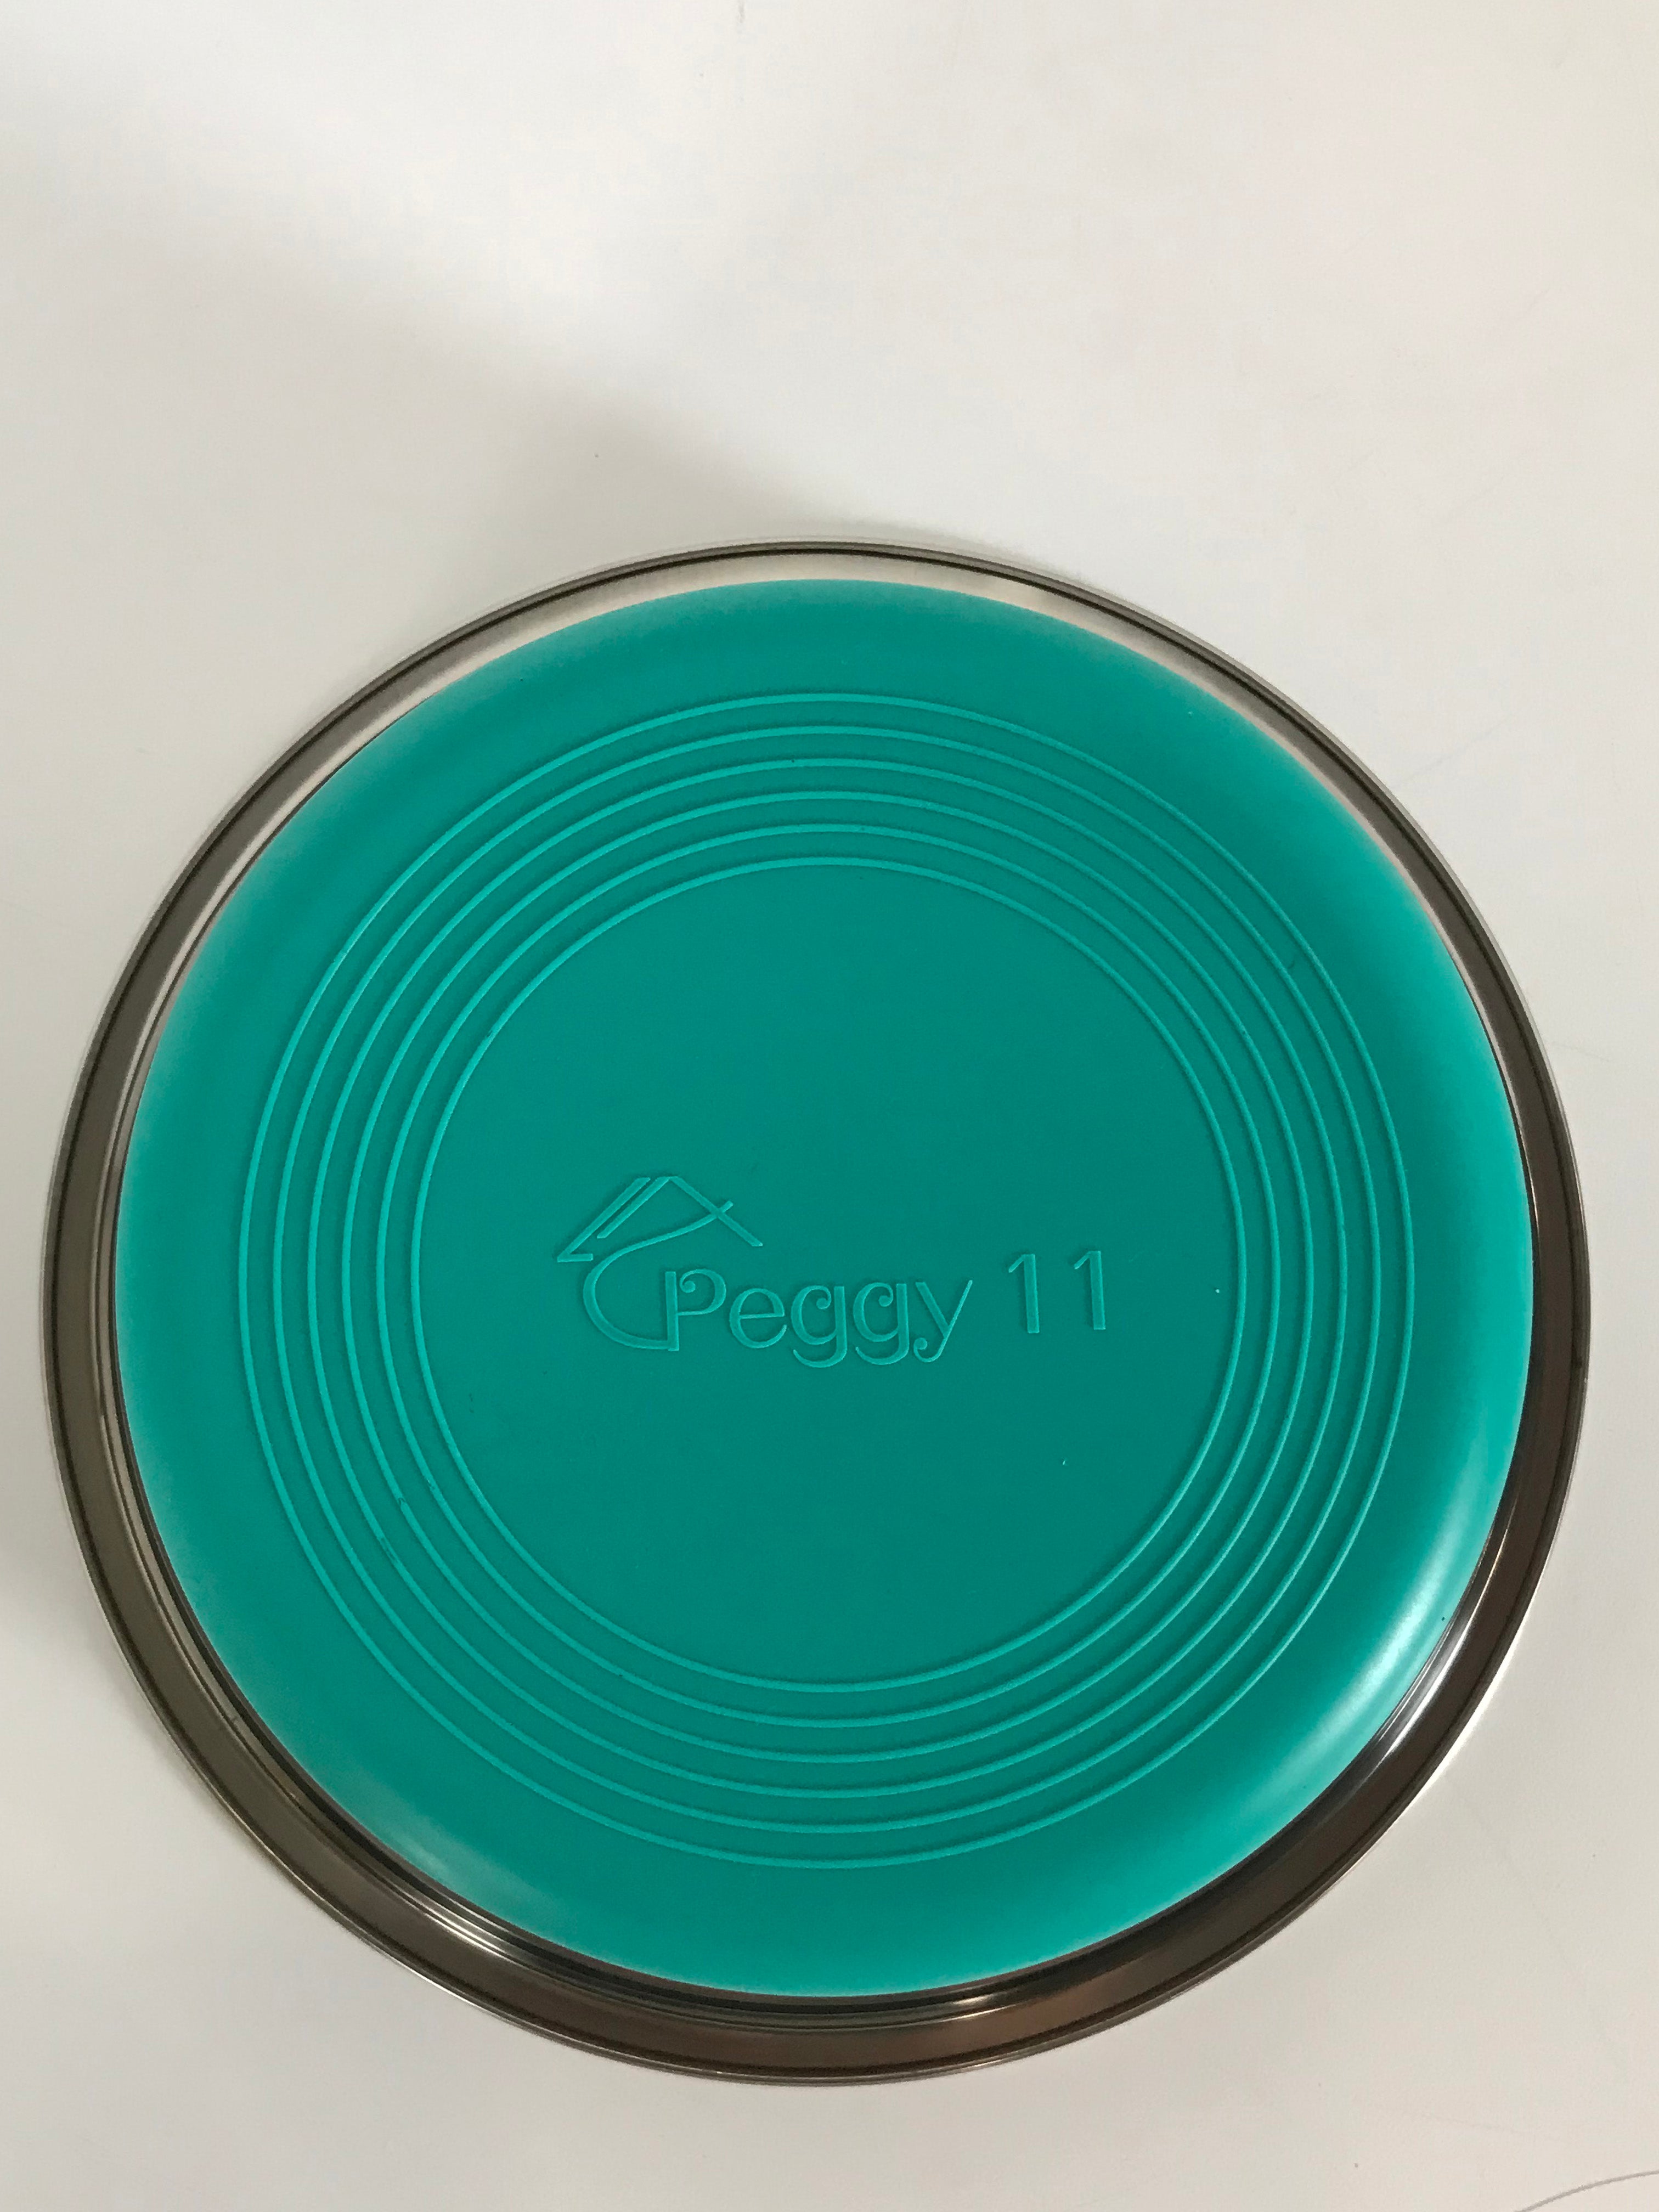 Set of 2 Peggy11 Non-slip Stainless Steel Dog Bowls